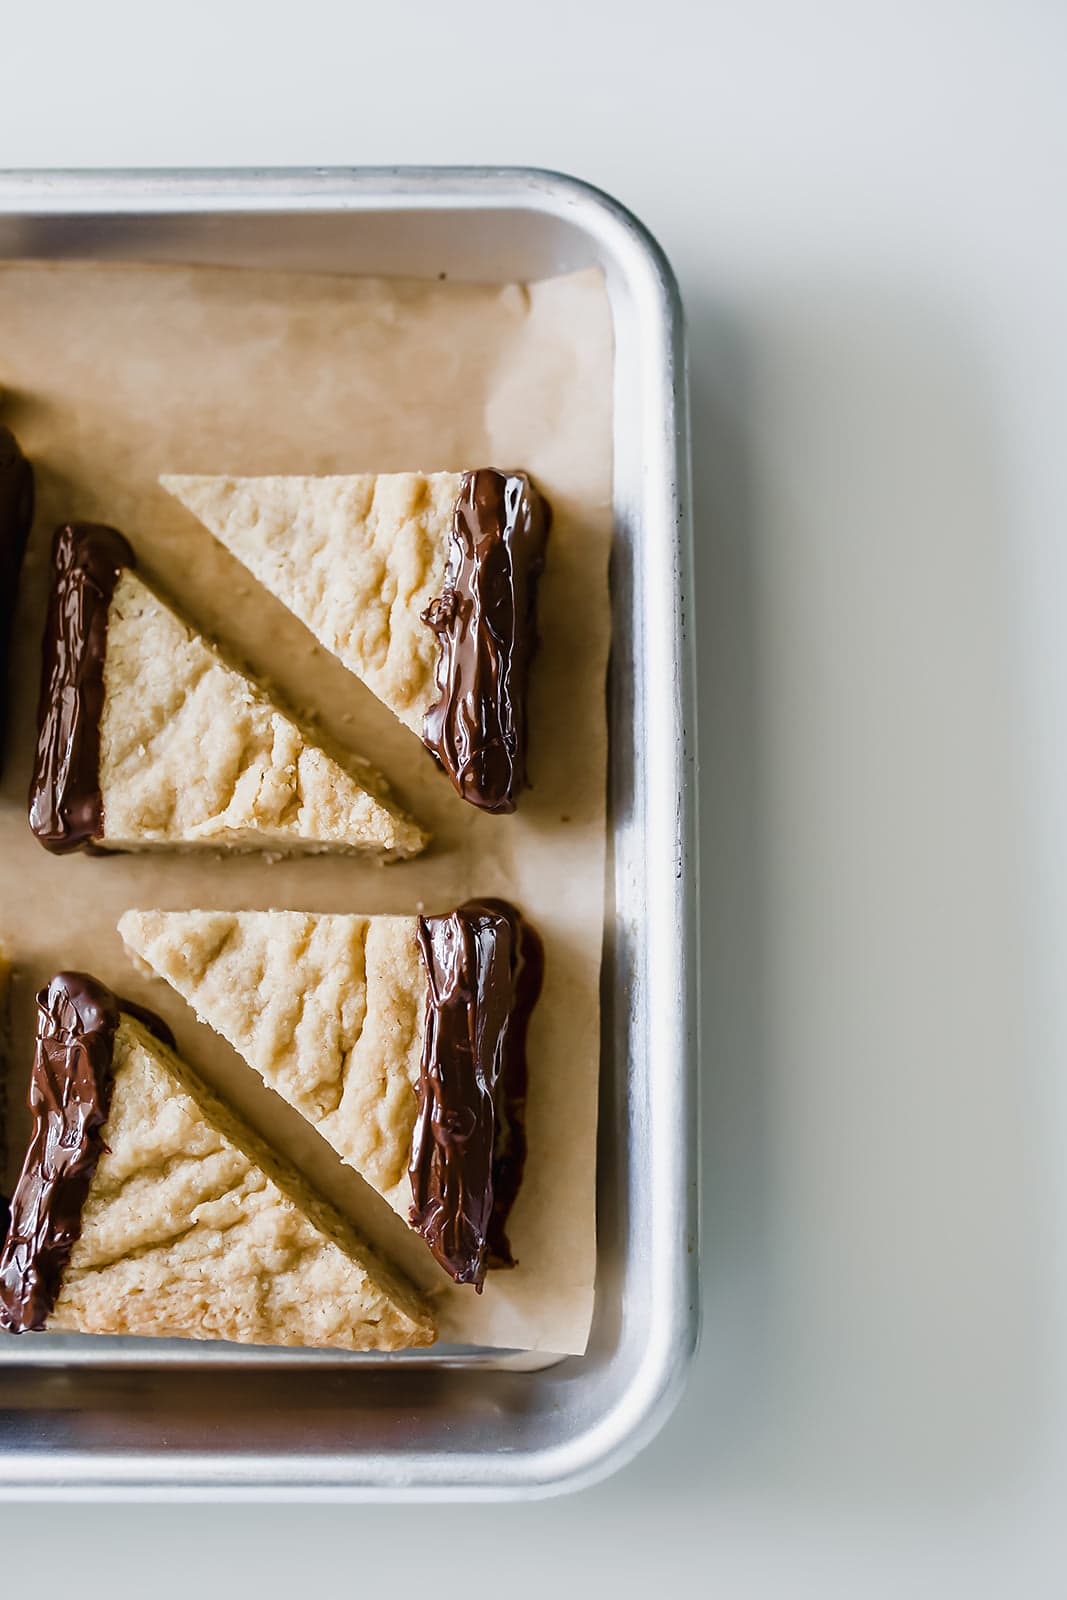 Easy Chocolate Dipped Shortbread Cookies feature a buttery shortbread made with oats and brown sugar dipped in chocolate for the ultimate afternoon treat!